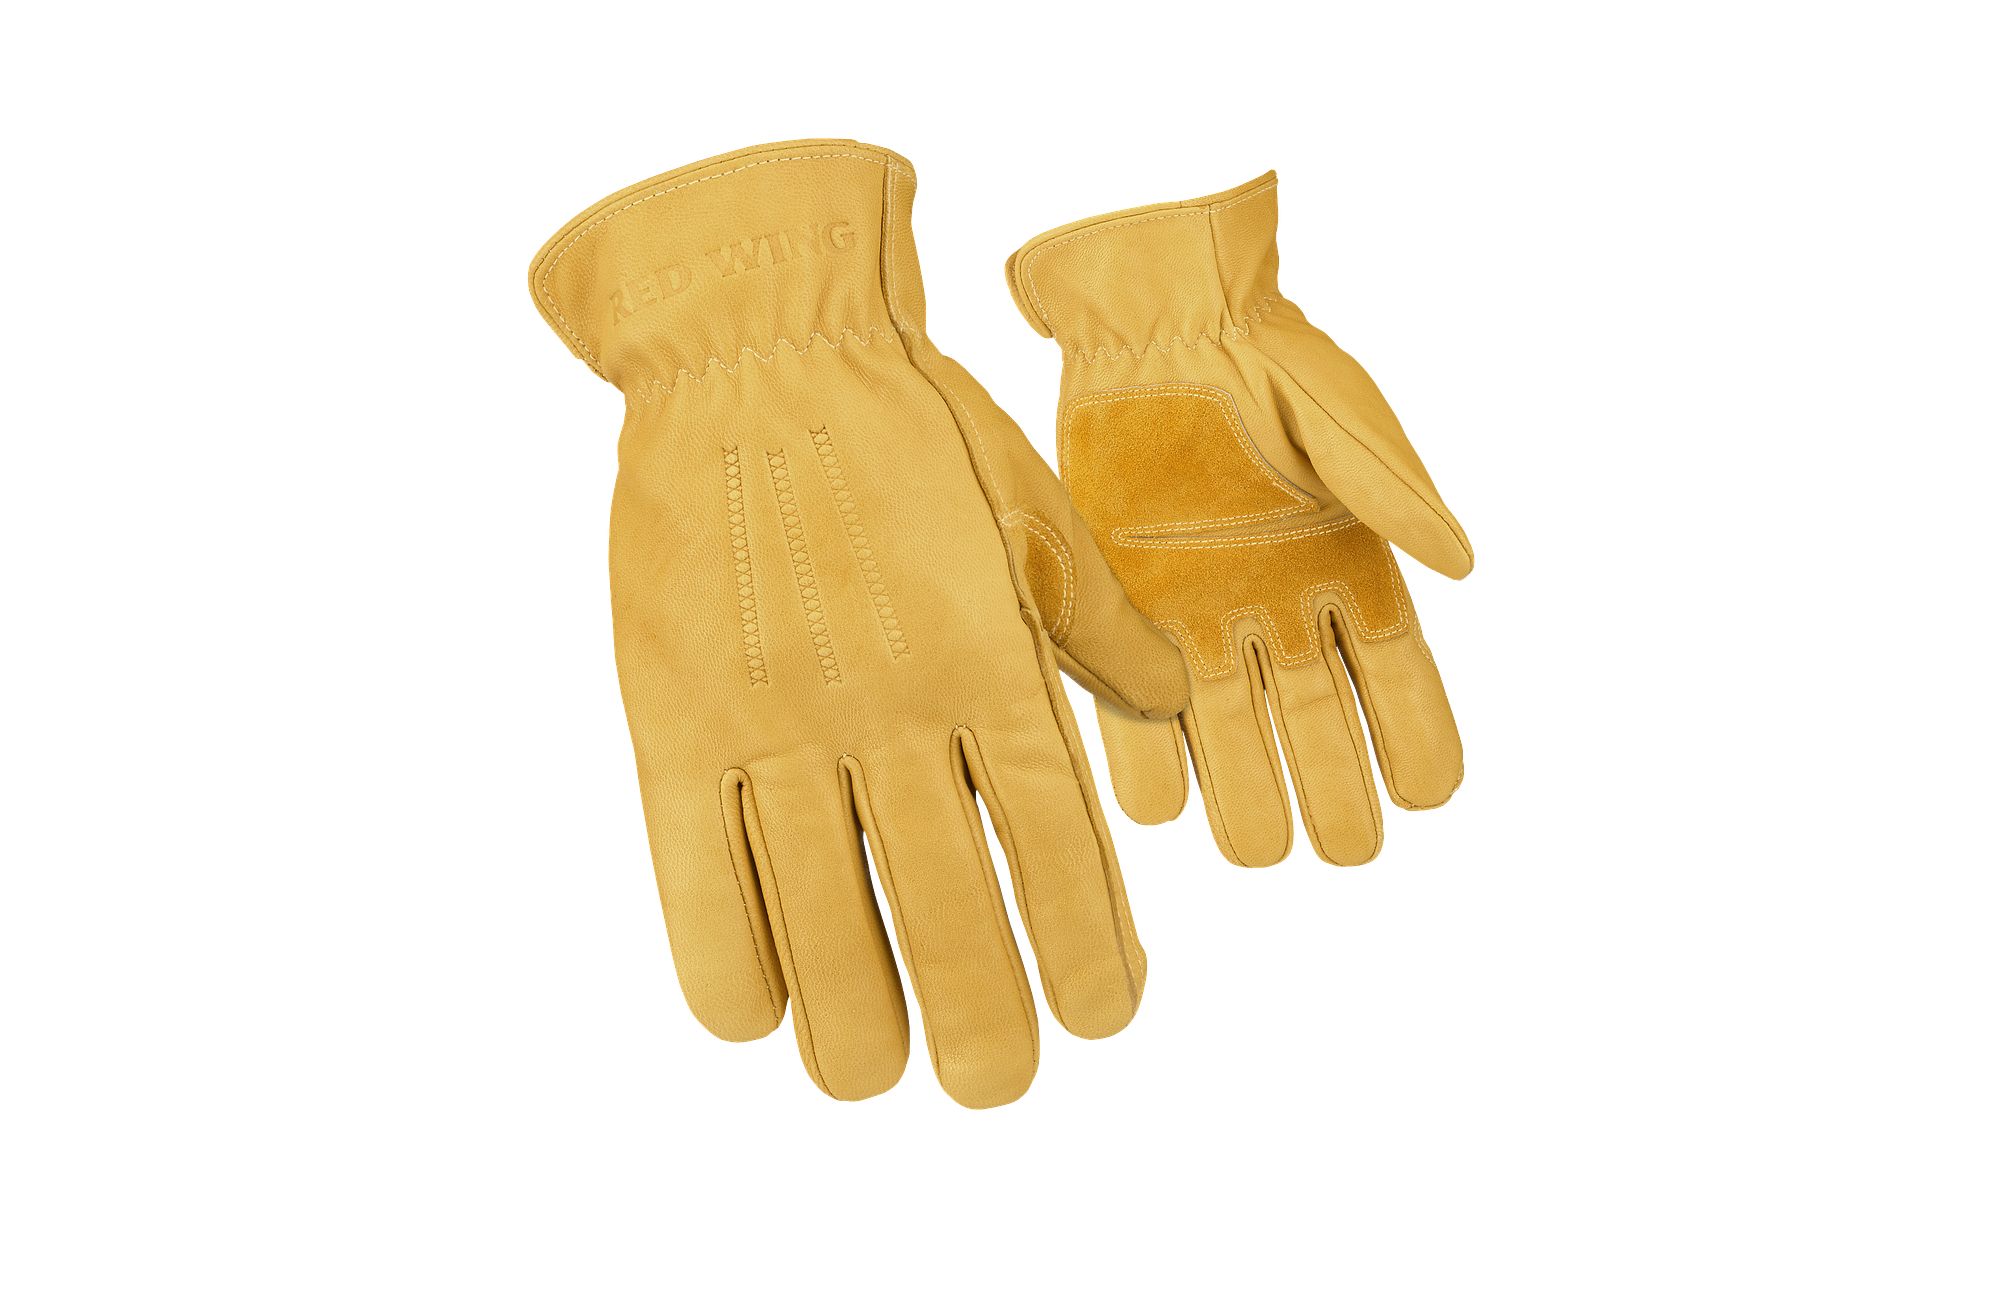 Leather Pro Work Gloves 95257 | Red Wing Shoes